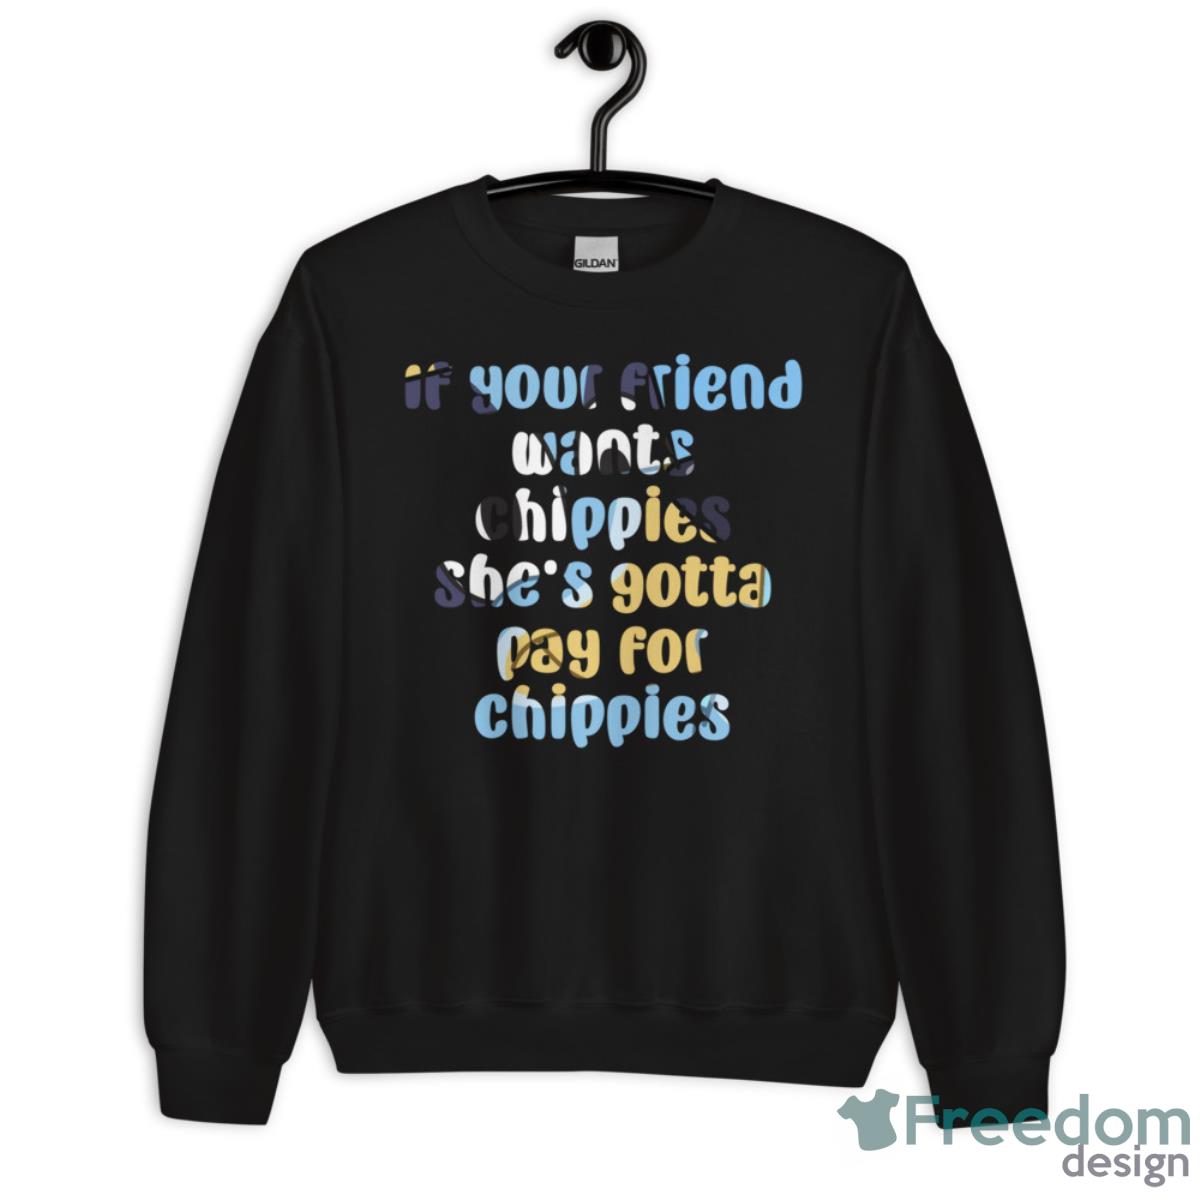 Bluey Dad If your friend wants chippies, she's gotta pay for chippies T Shirt